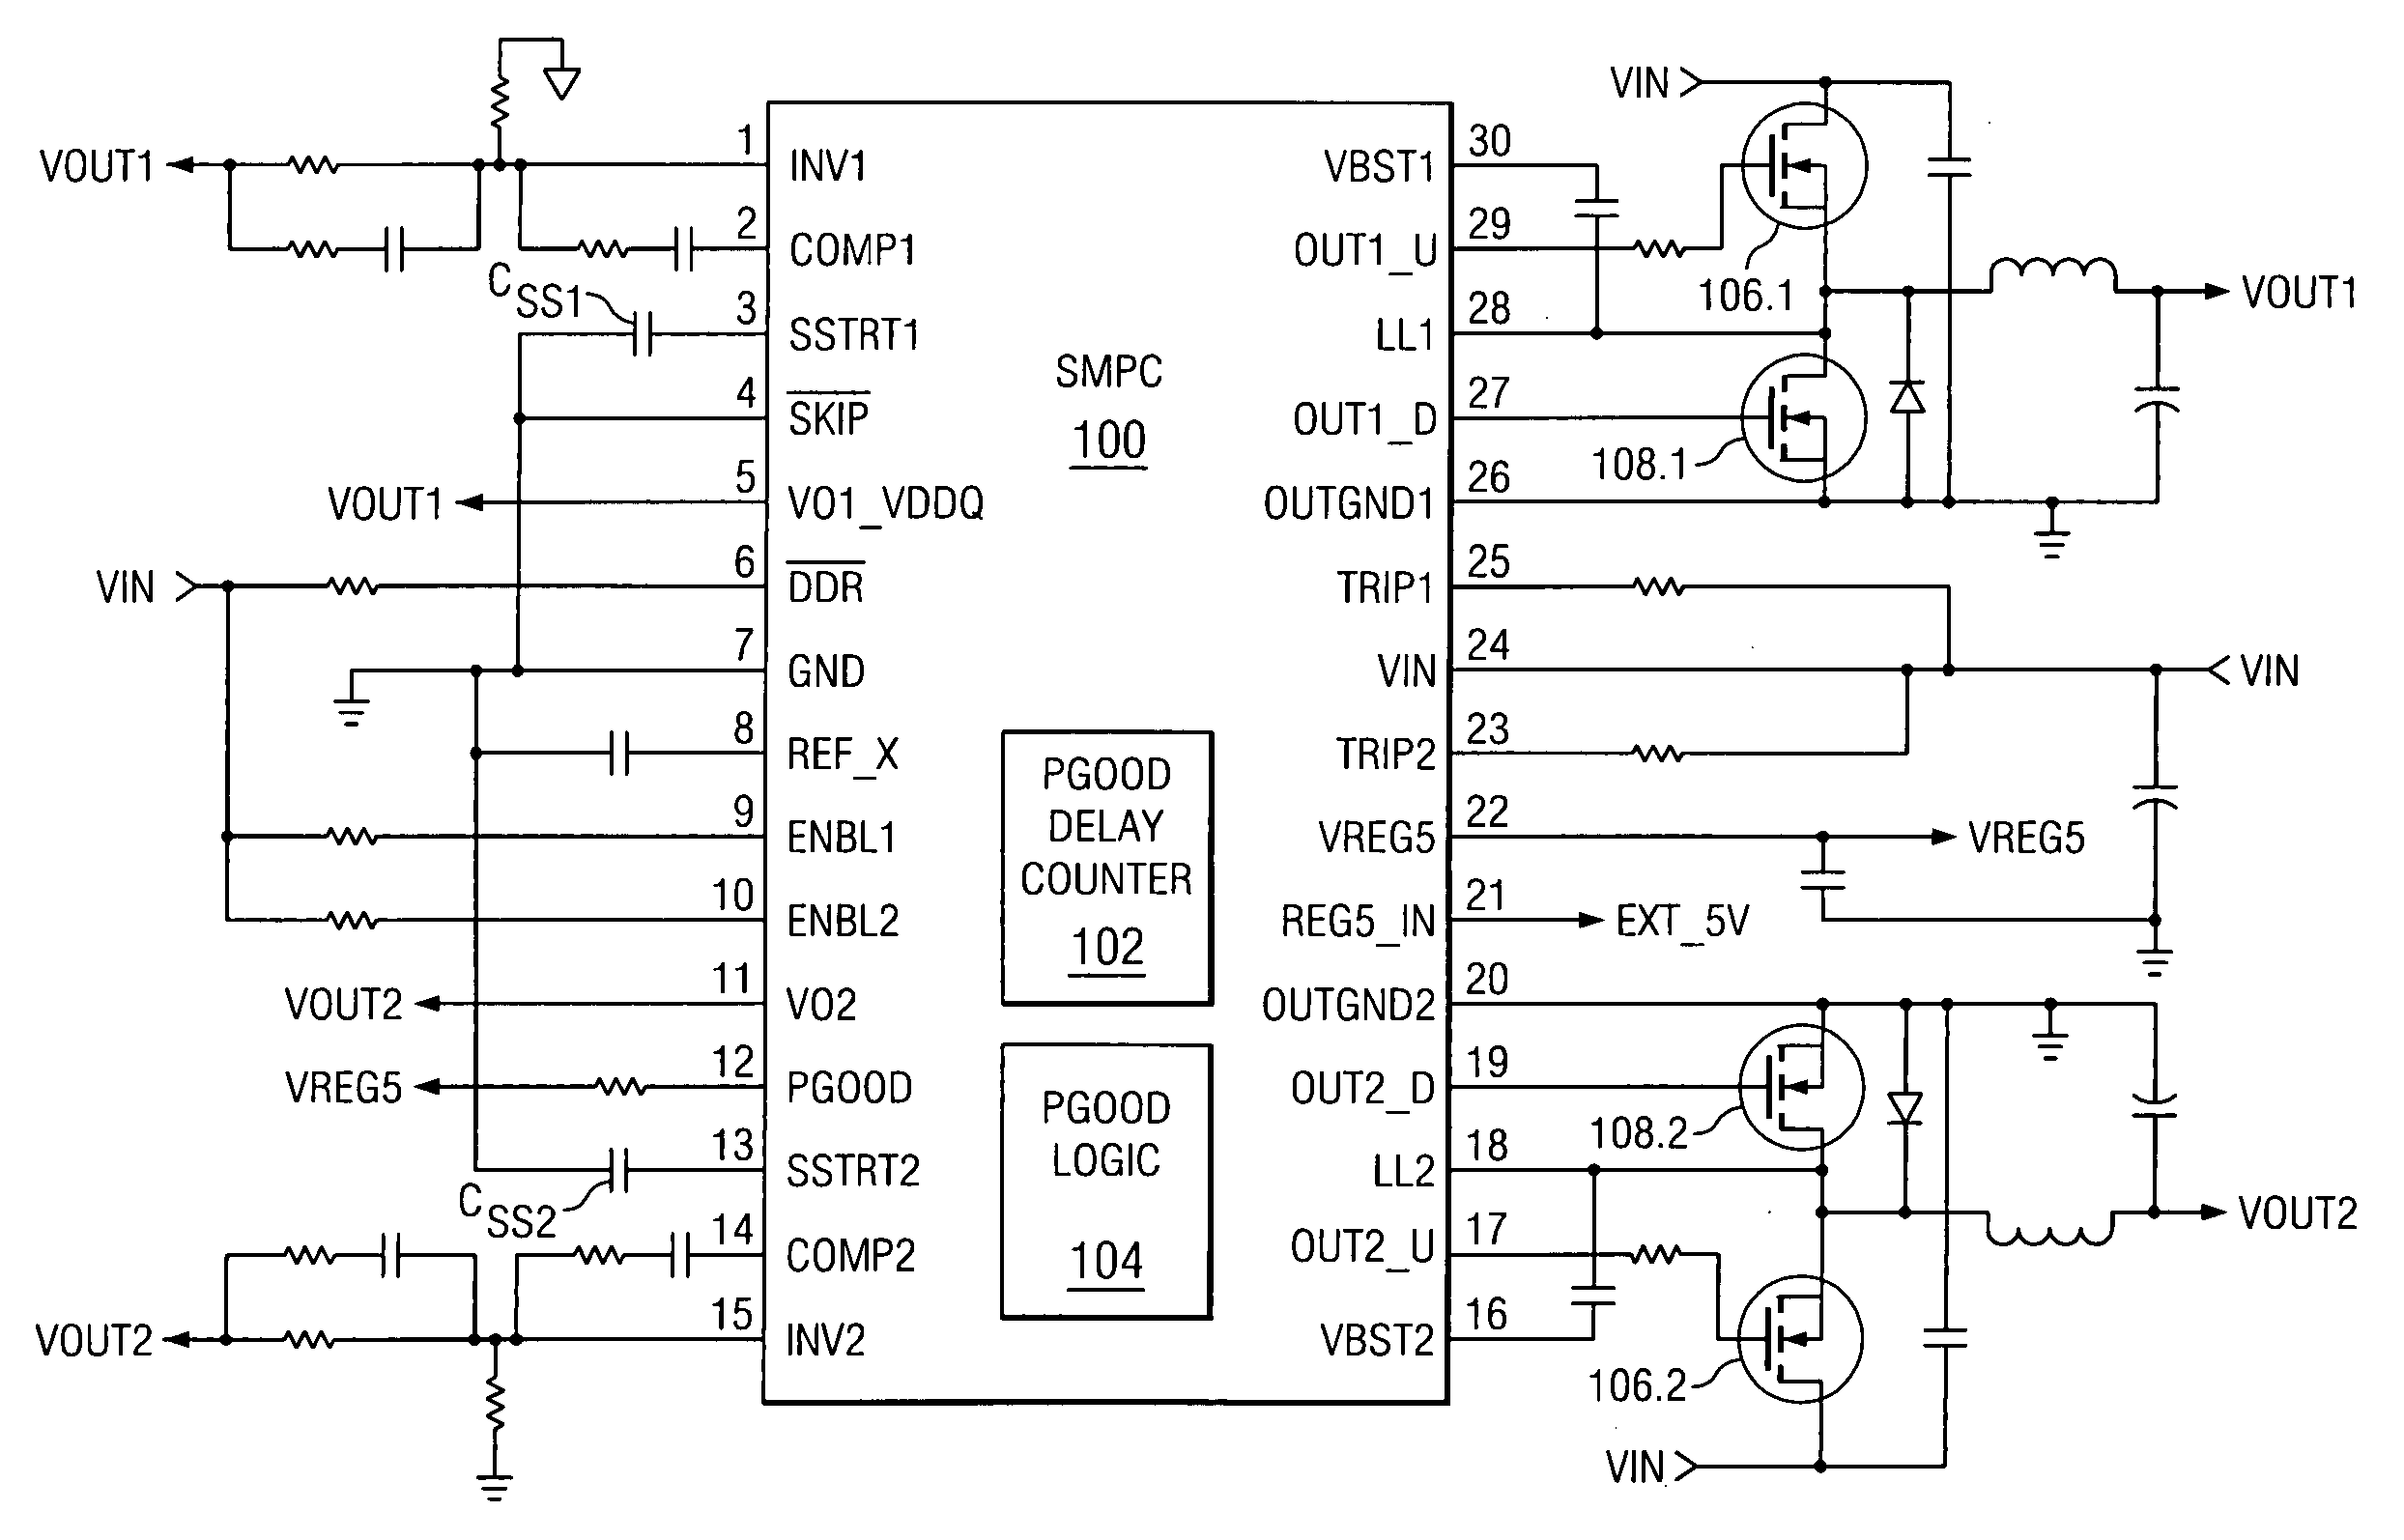 Advanced monitoring algorithm for regulated power systems with single output flag